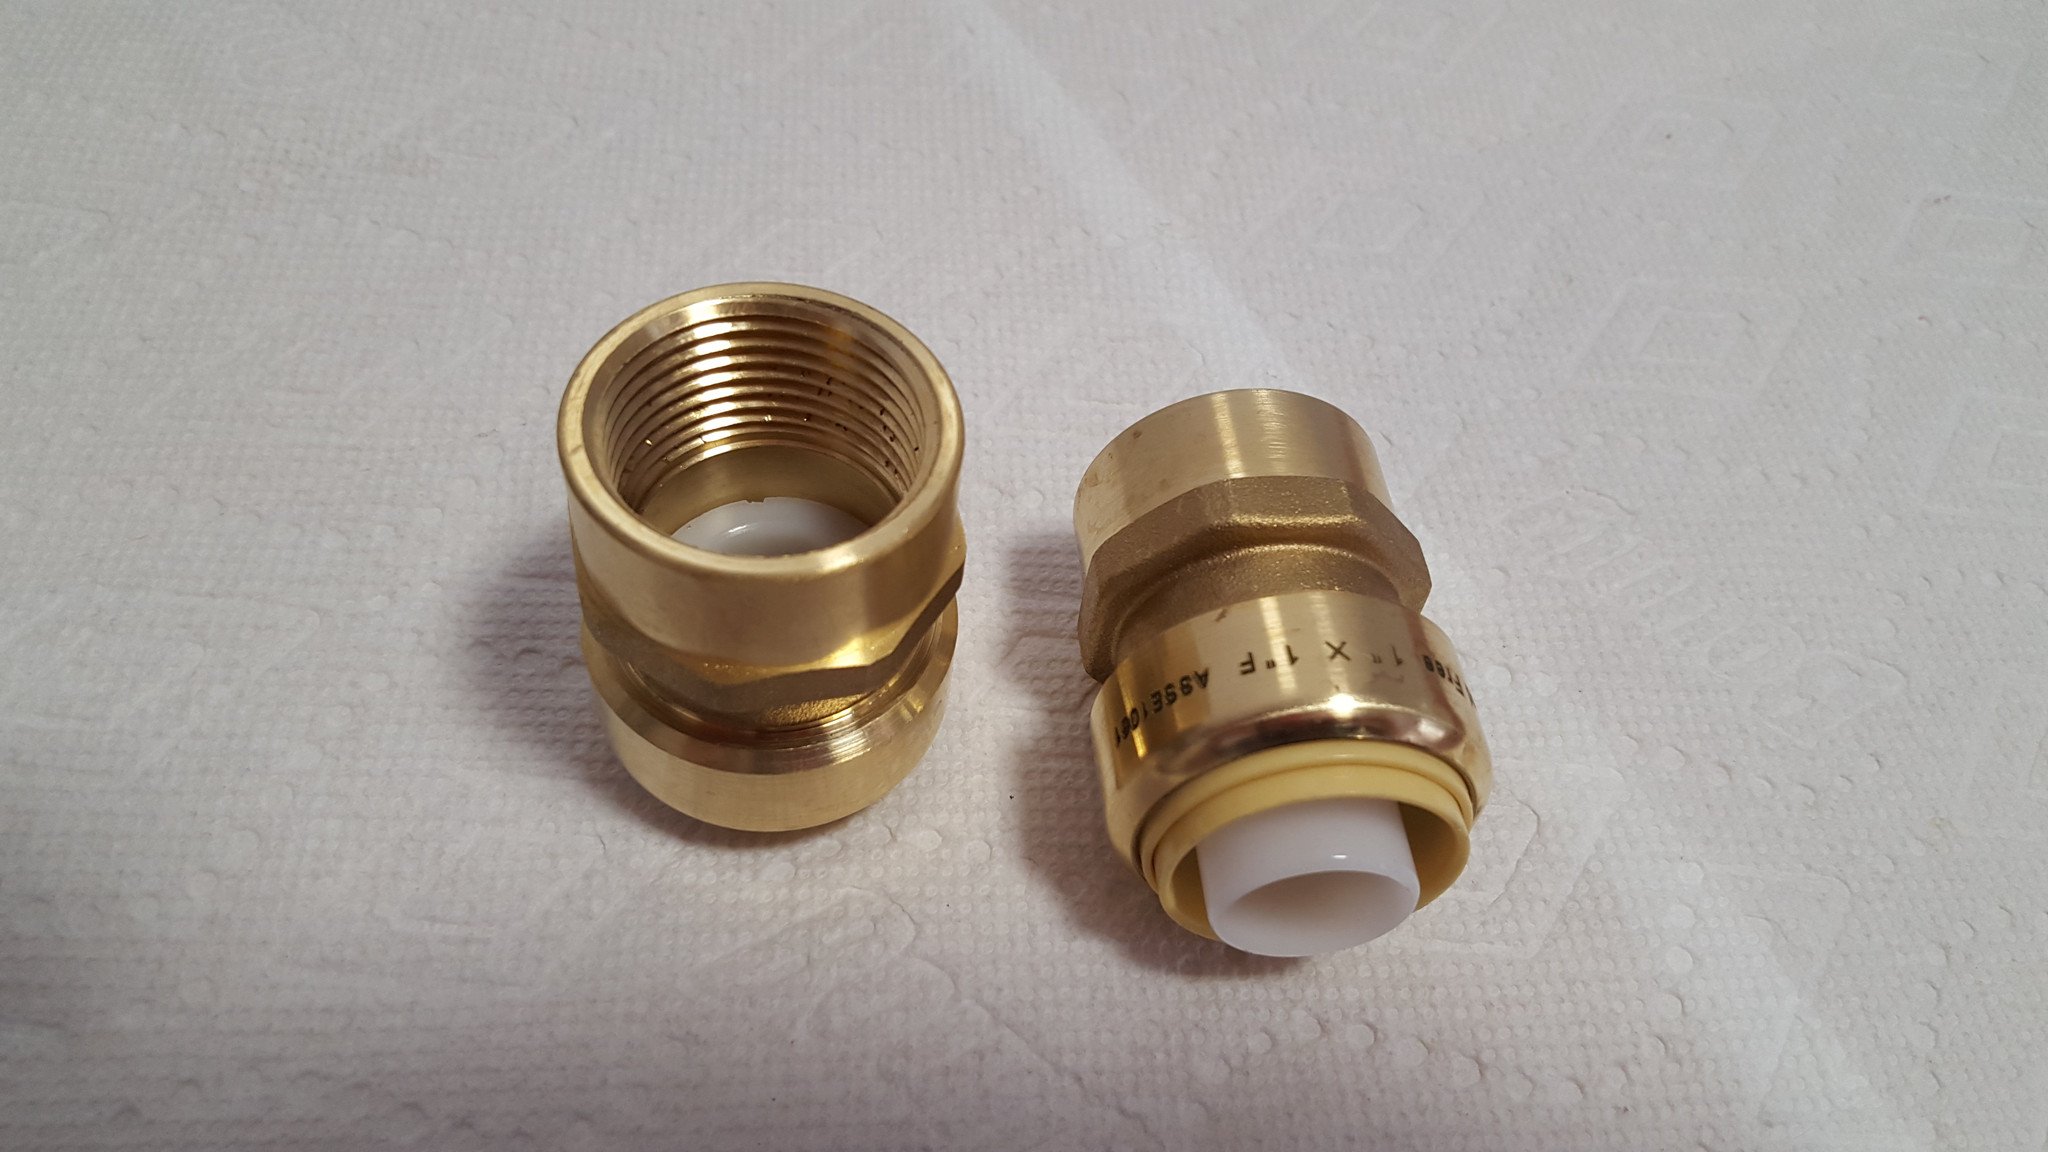 1" FPT (Female Pipe Thread) Push Fitting